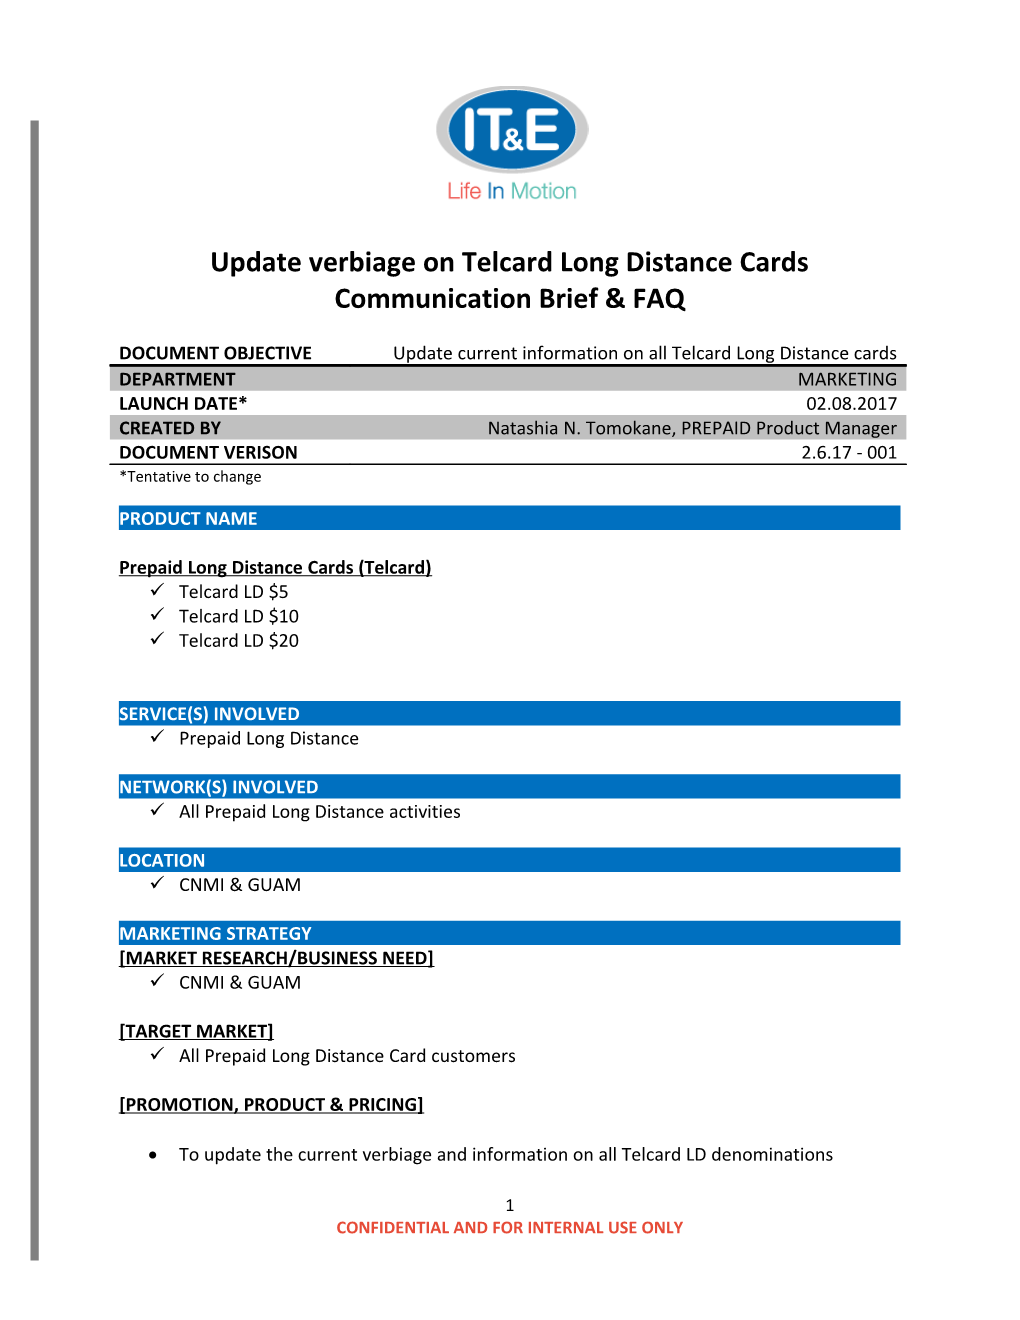 Update Verbiage on Telcard Long Distance Cards